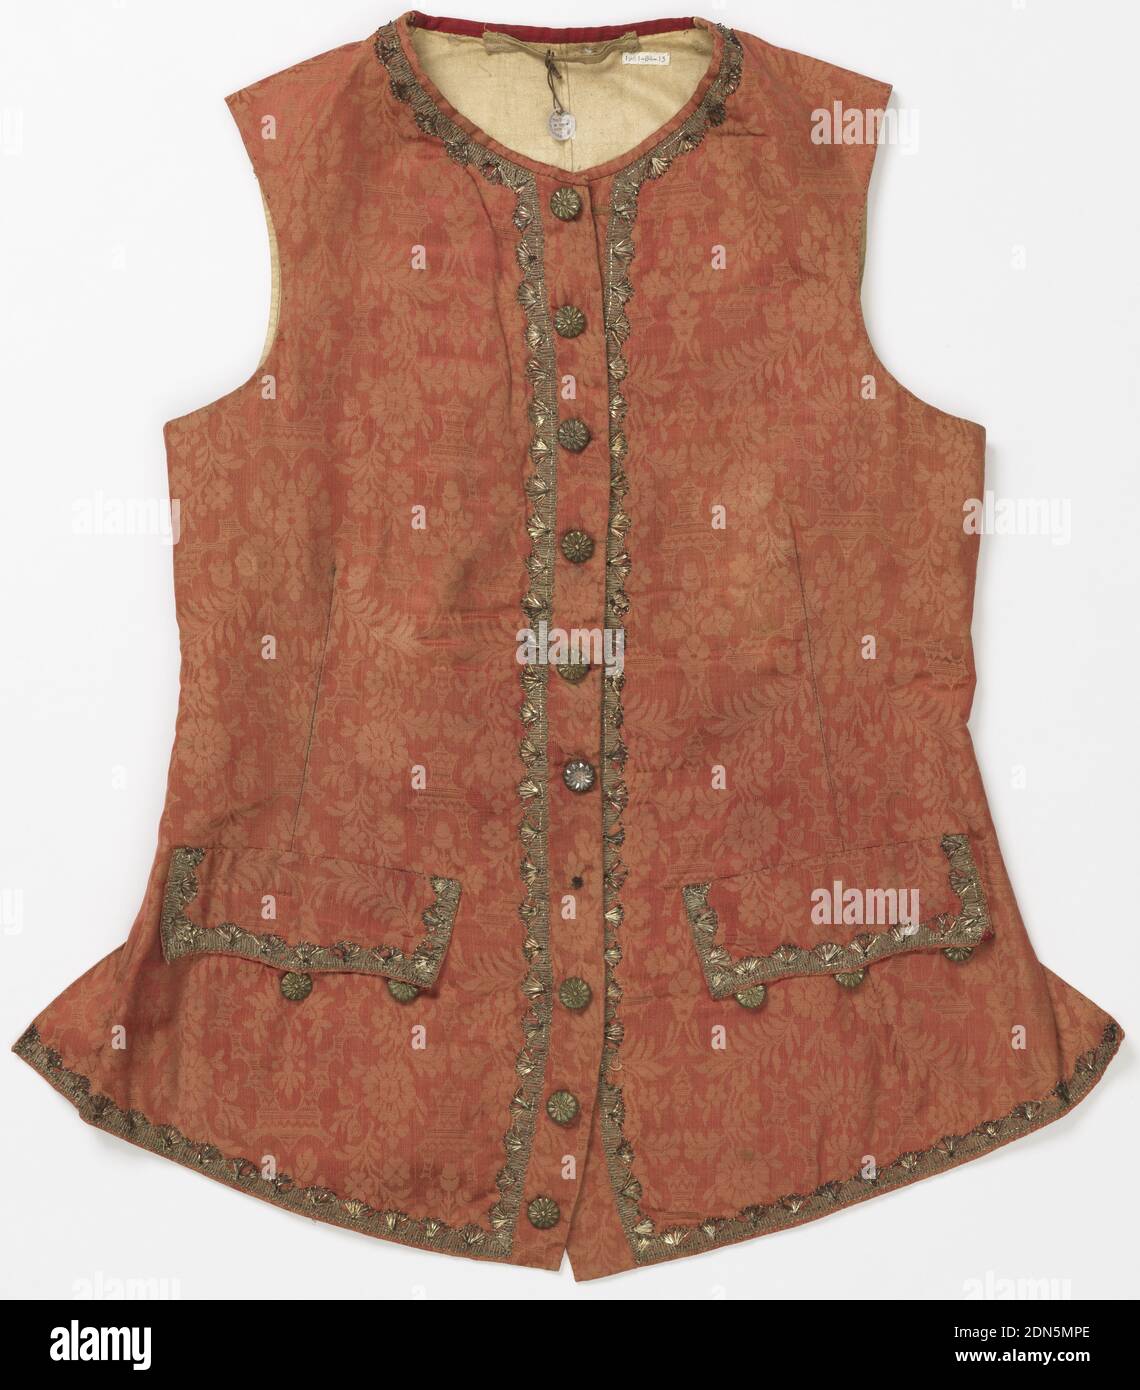 Waistcoat, Medium: silk, metallic thread Technique: woven, bobbin lace, Collarless and sleeveless waistcoat in an orange-red patterned silk with metallic bobbin lace appliqué and metal buttons. Slightly pointed pocket flaps. Possibly made for fancy dress., 19th century, costume & accessories, Waistcoat Stock Photo